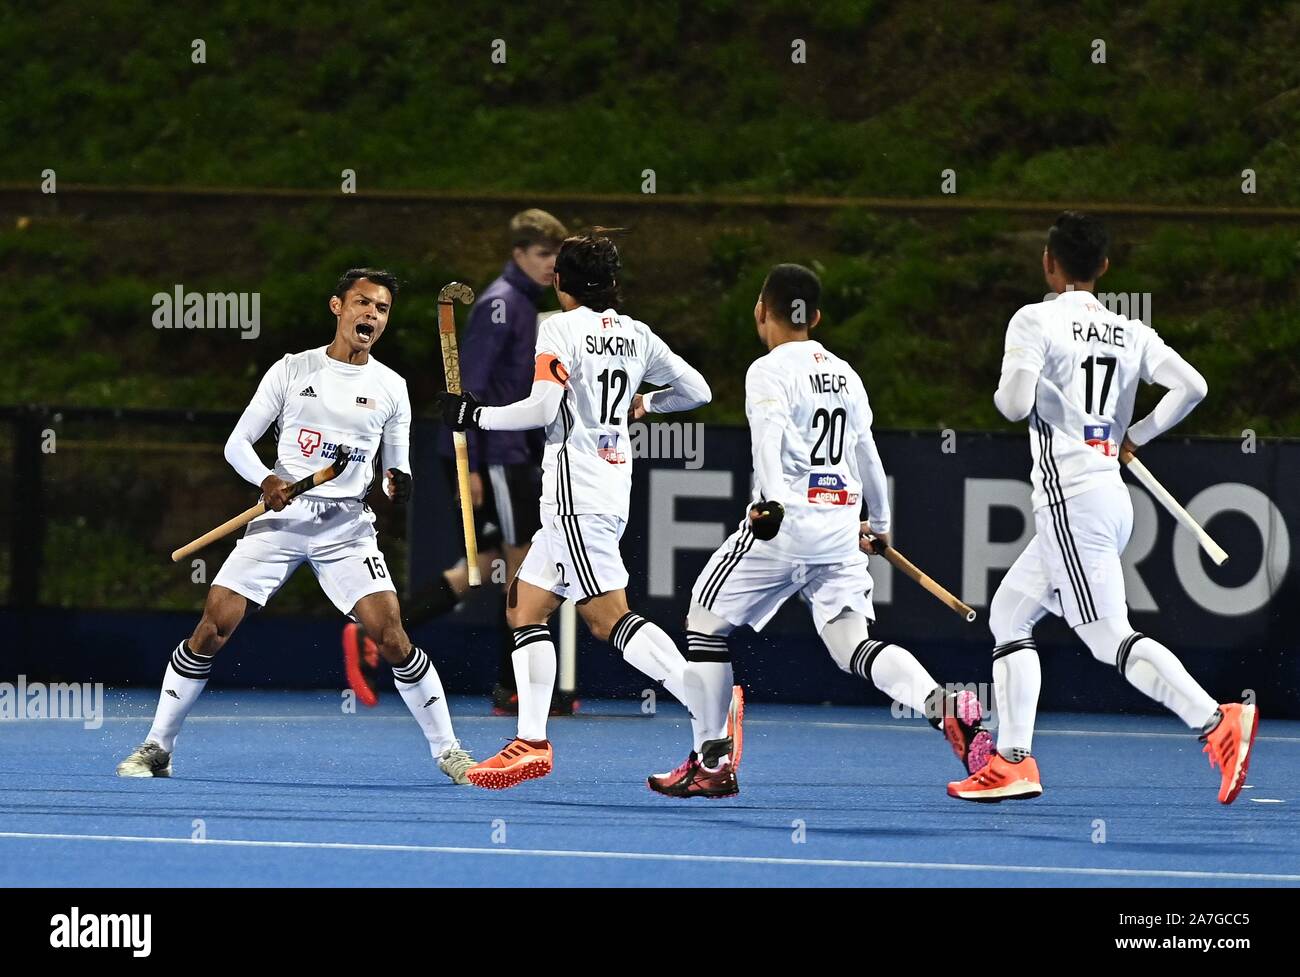 Stratford, United Kingdom. 02nd Nov, 2019. Goalscorer Nabil Noor (Malaysia, left) celebrates scoring the first goal. Great Britain v Malaysia. FIH Mens Olympic hockey qualifier. Lee Valley hockey and tennis centre. Stratford. London. United Kingdom. Credit Garry Bowden/Sport in Pictures/Alamy Live News. Credit: Sport In Pictures/Alamy Live News Stock Photo